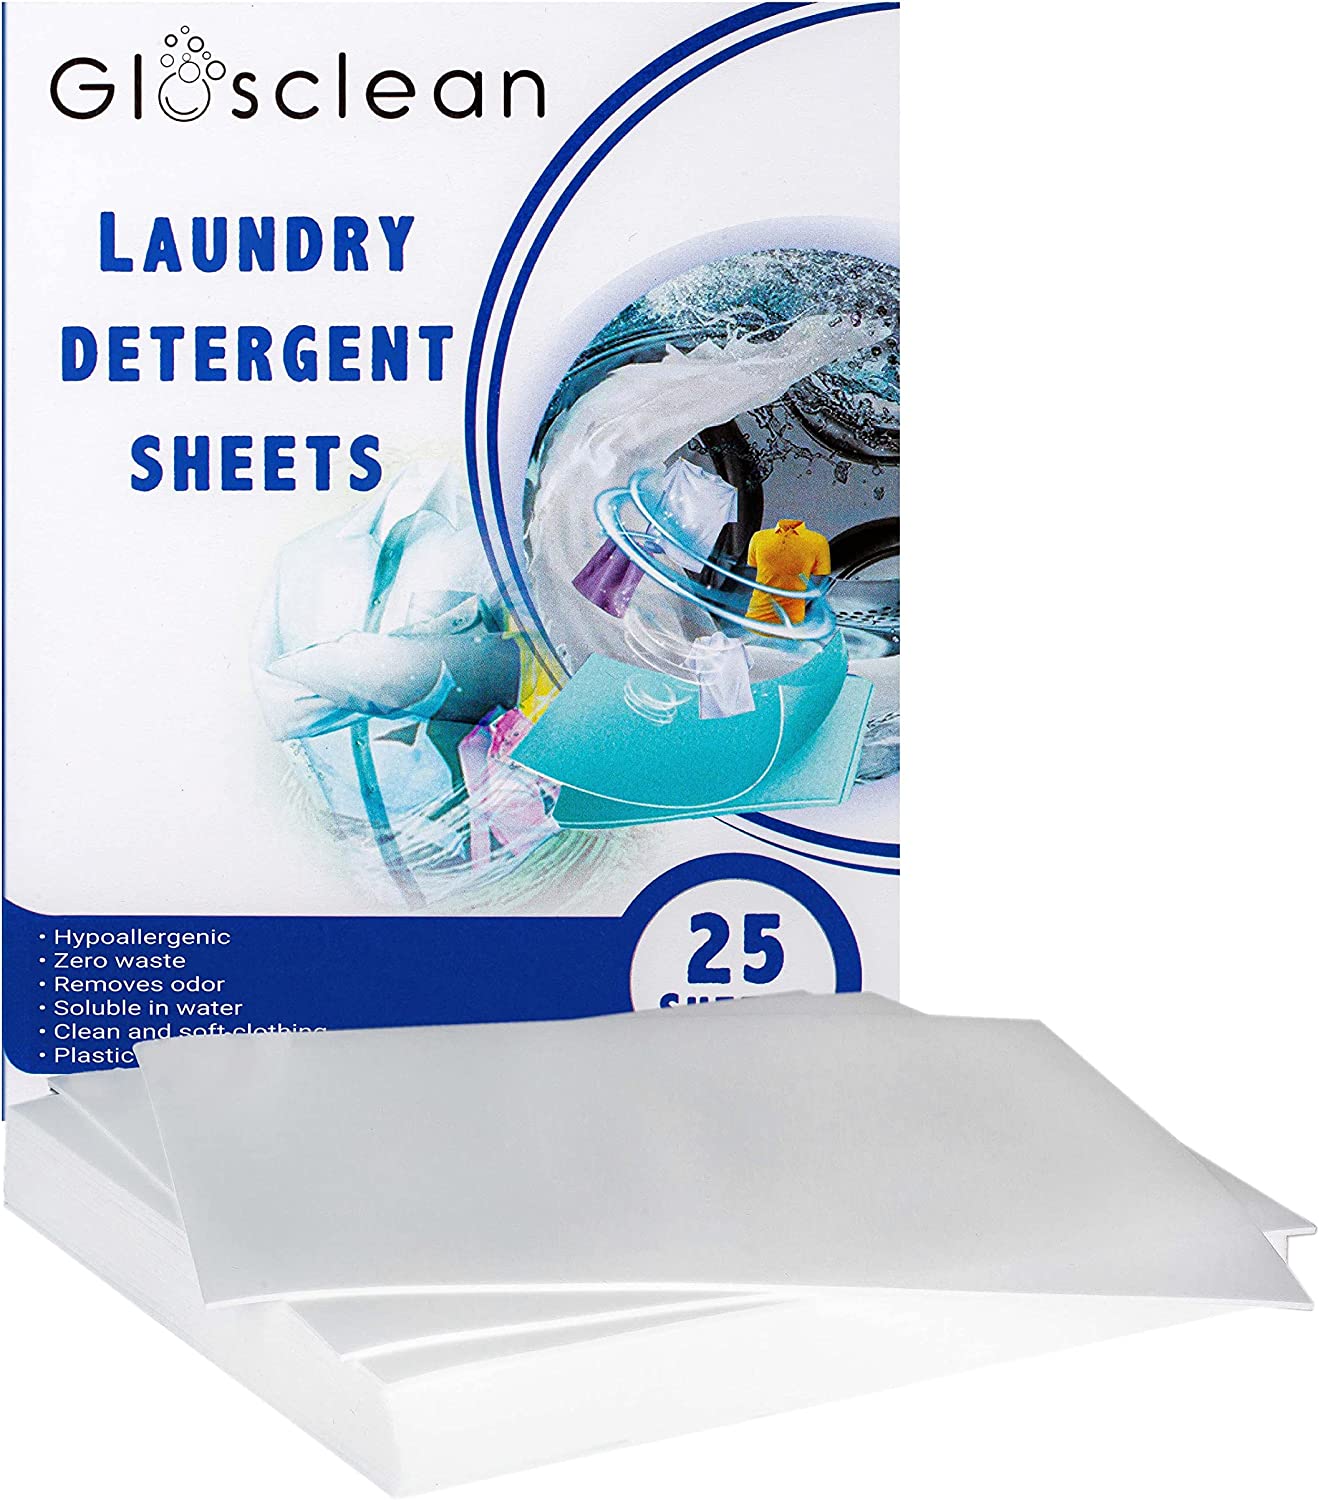 glosclean laundry detergent sheets